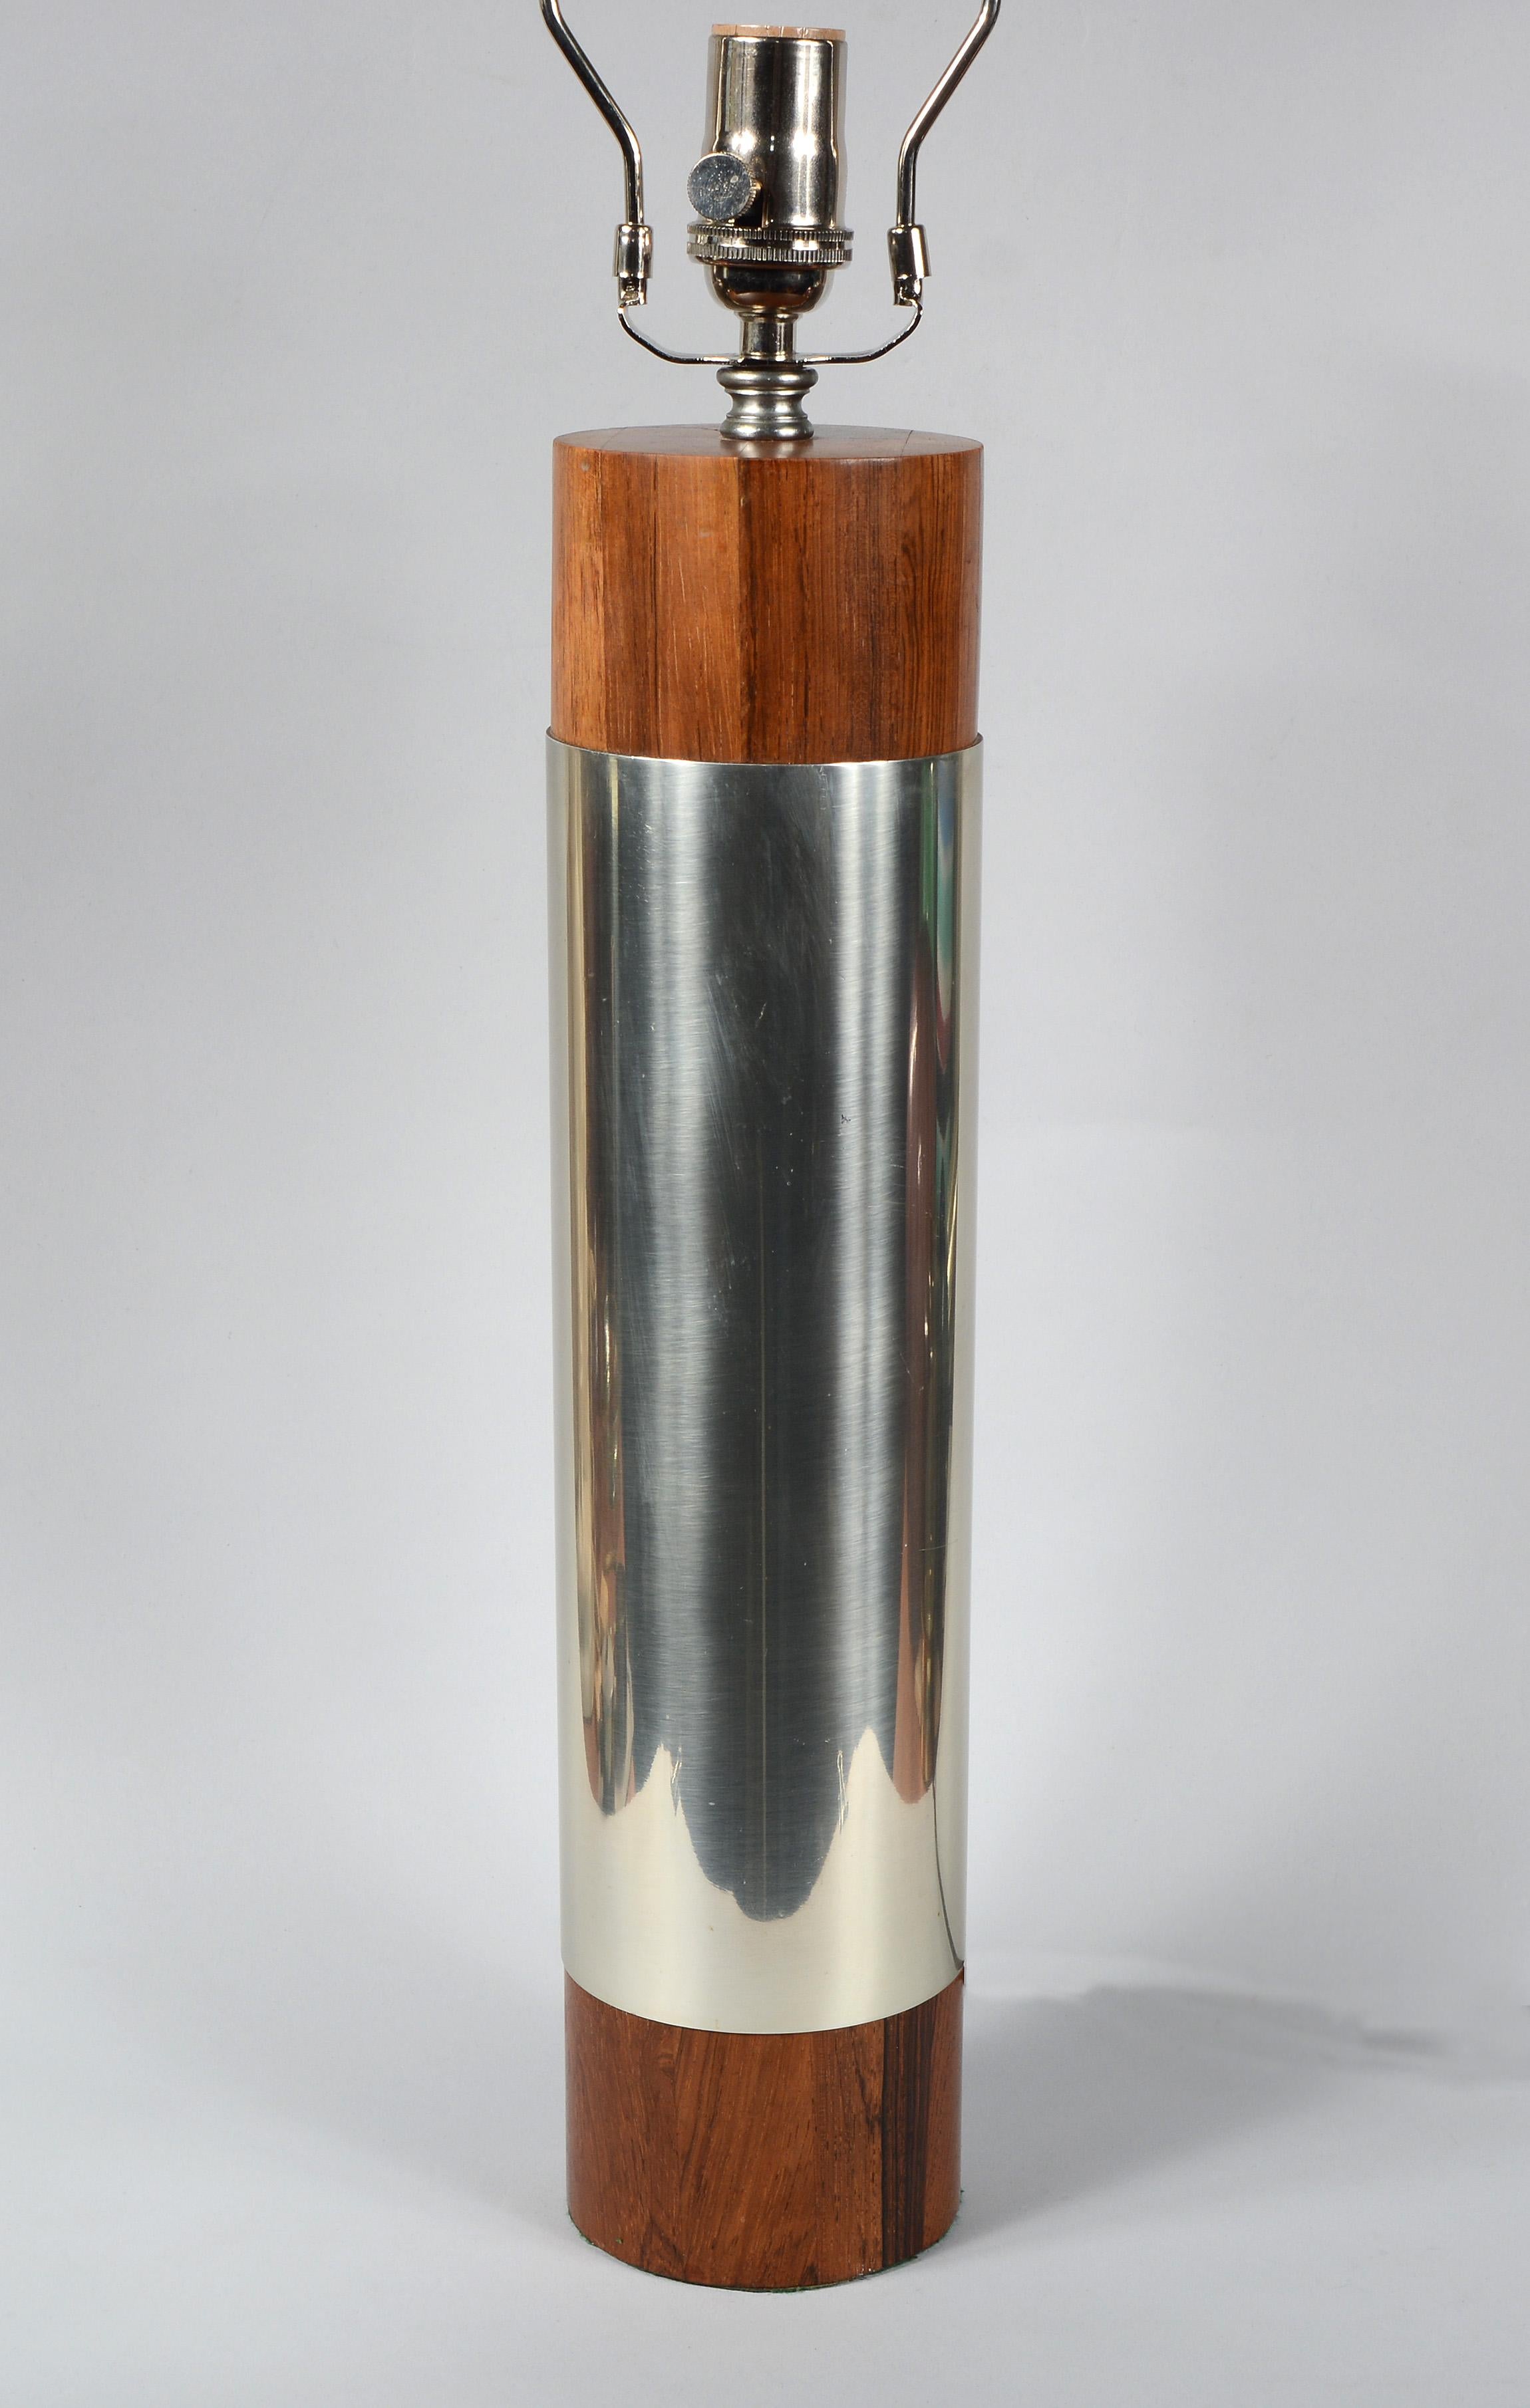 Cylindrical table lamp in rosewood and aluminum. This has solid rosewood top and bottom with a polished aluminum cylinder in between. The height given is to the top of the harp. The height to the bottom of the socket is 18